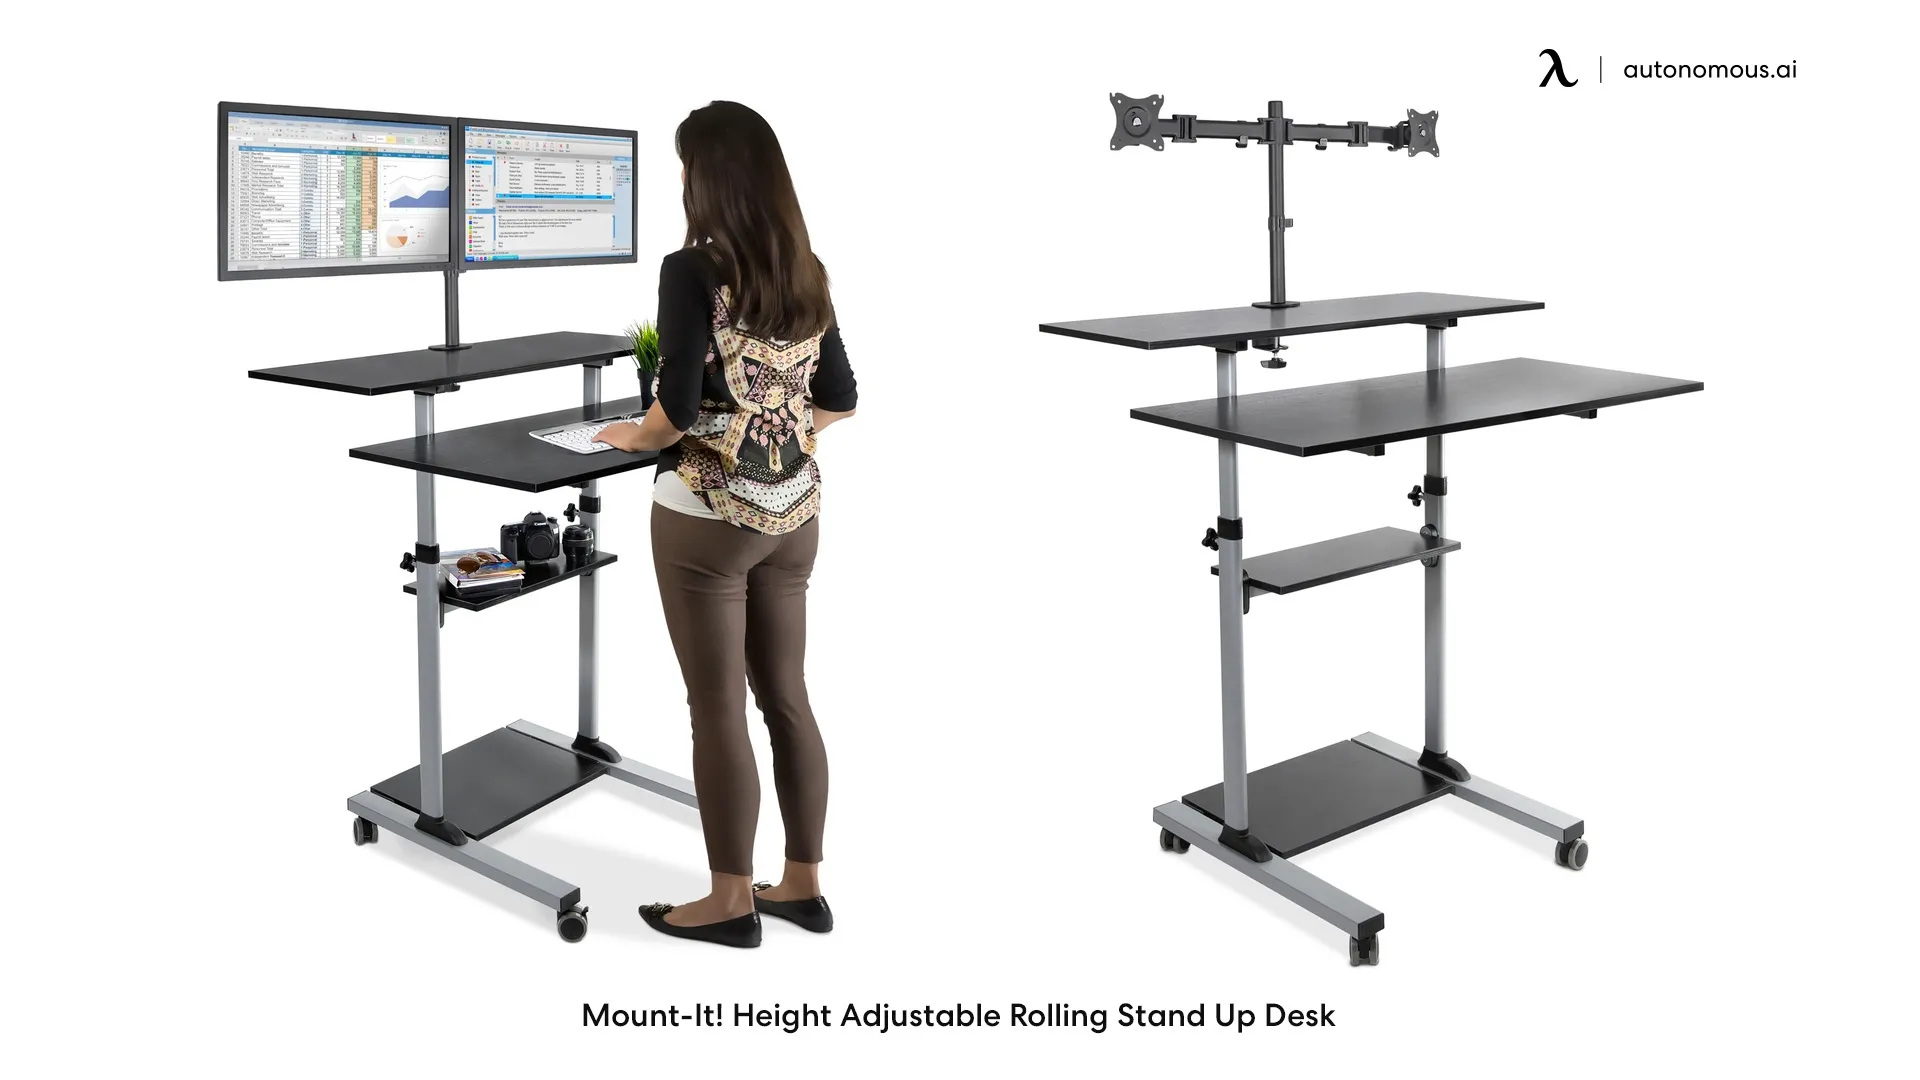 Large Height Adjustable Rolling Stand-Up Desk by Mount-It!